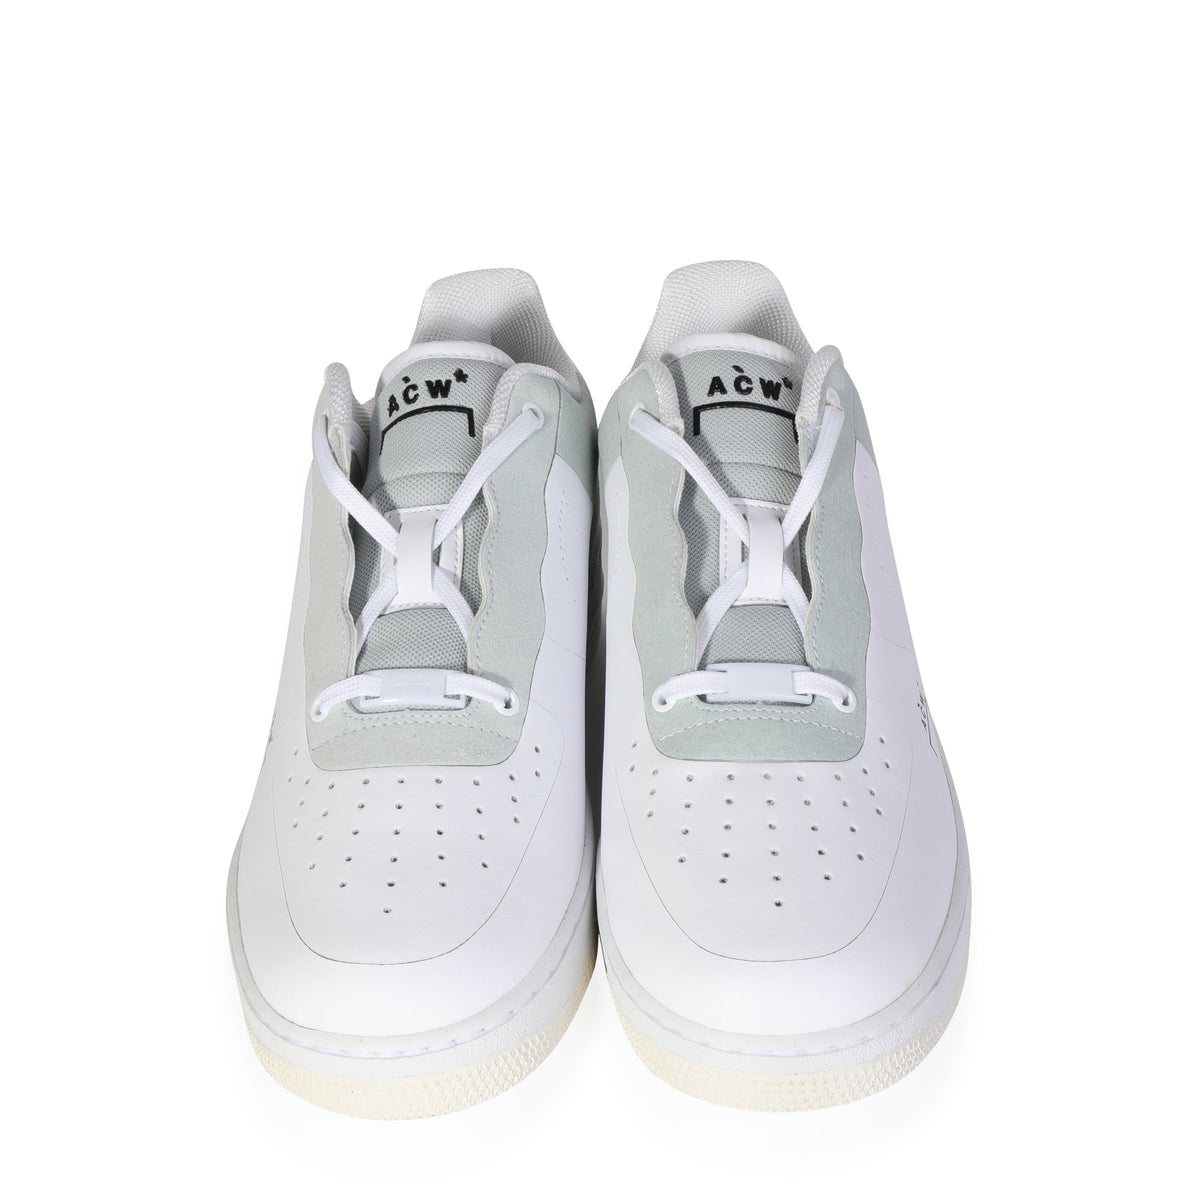 patois Blænding besejret Nike - A-Cold-Wall* x Air Force 1 Low 'White' (11 US) | myGemma | GB | Item  #119921